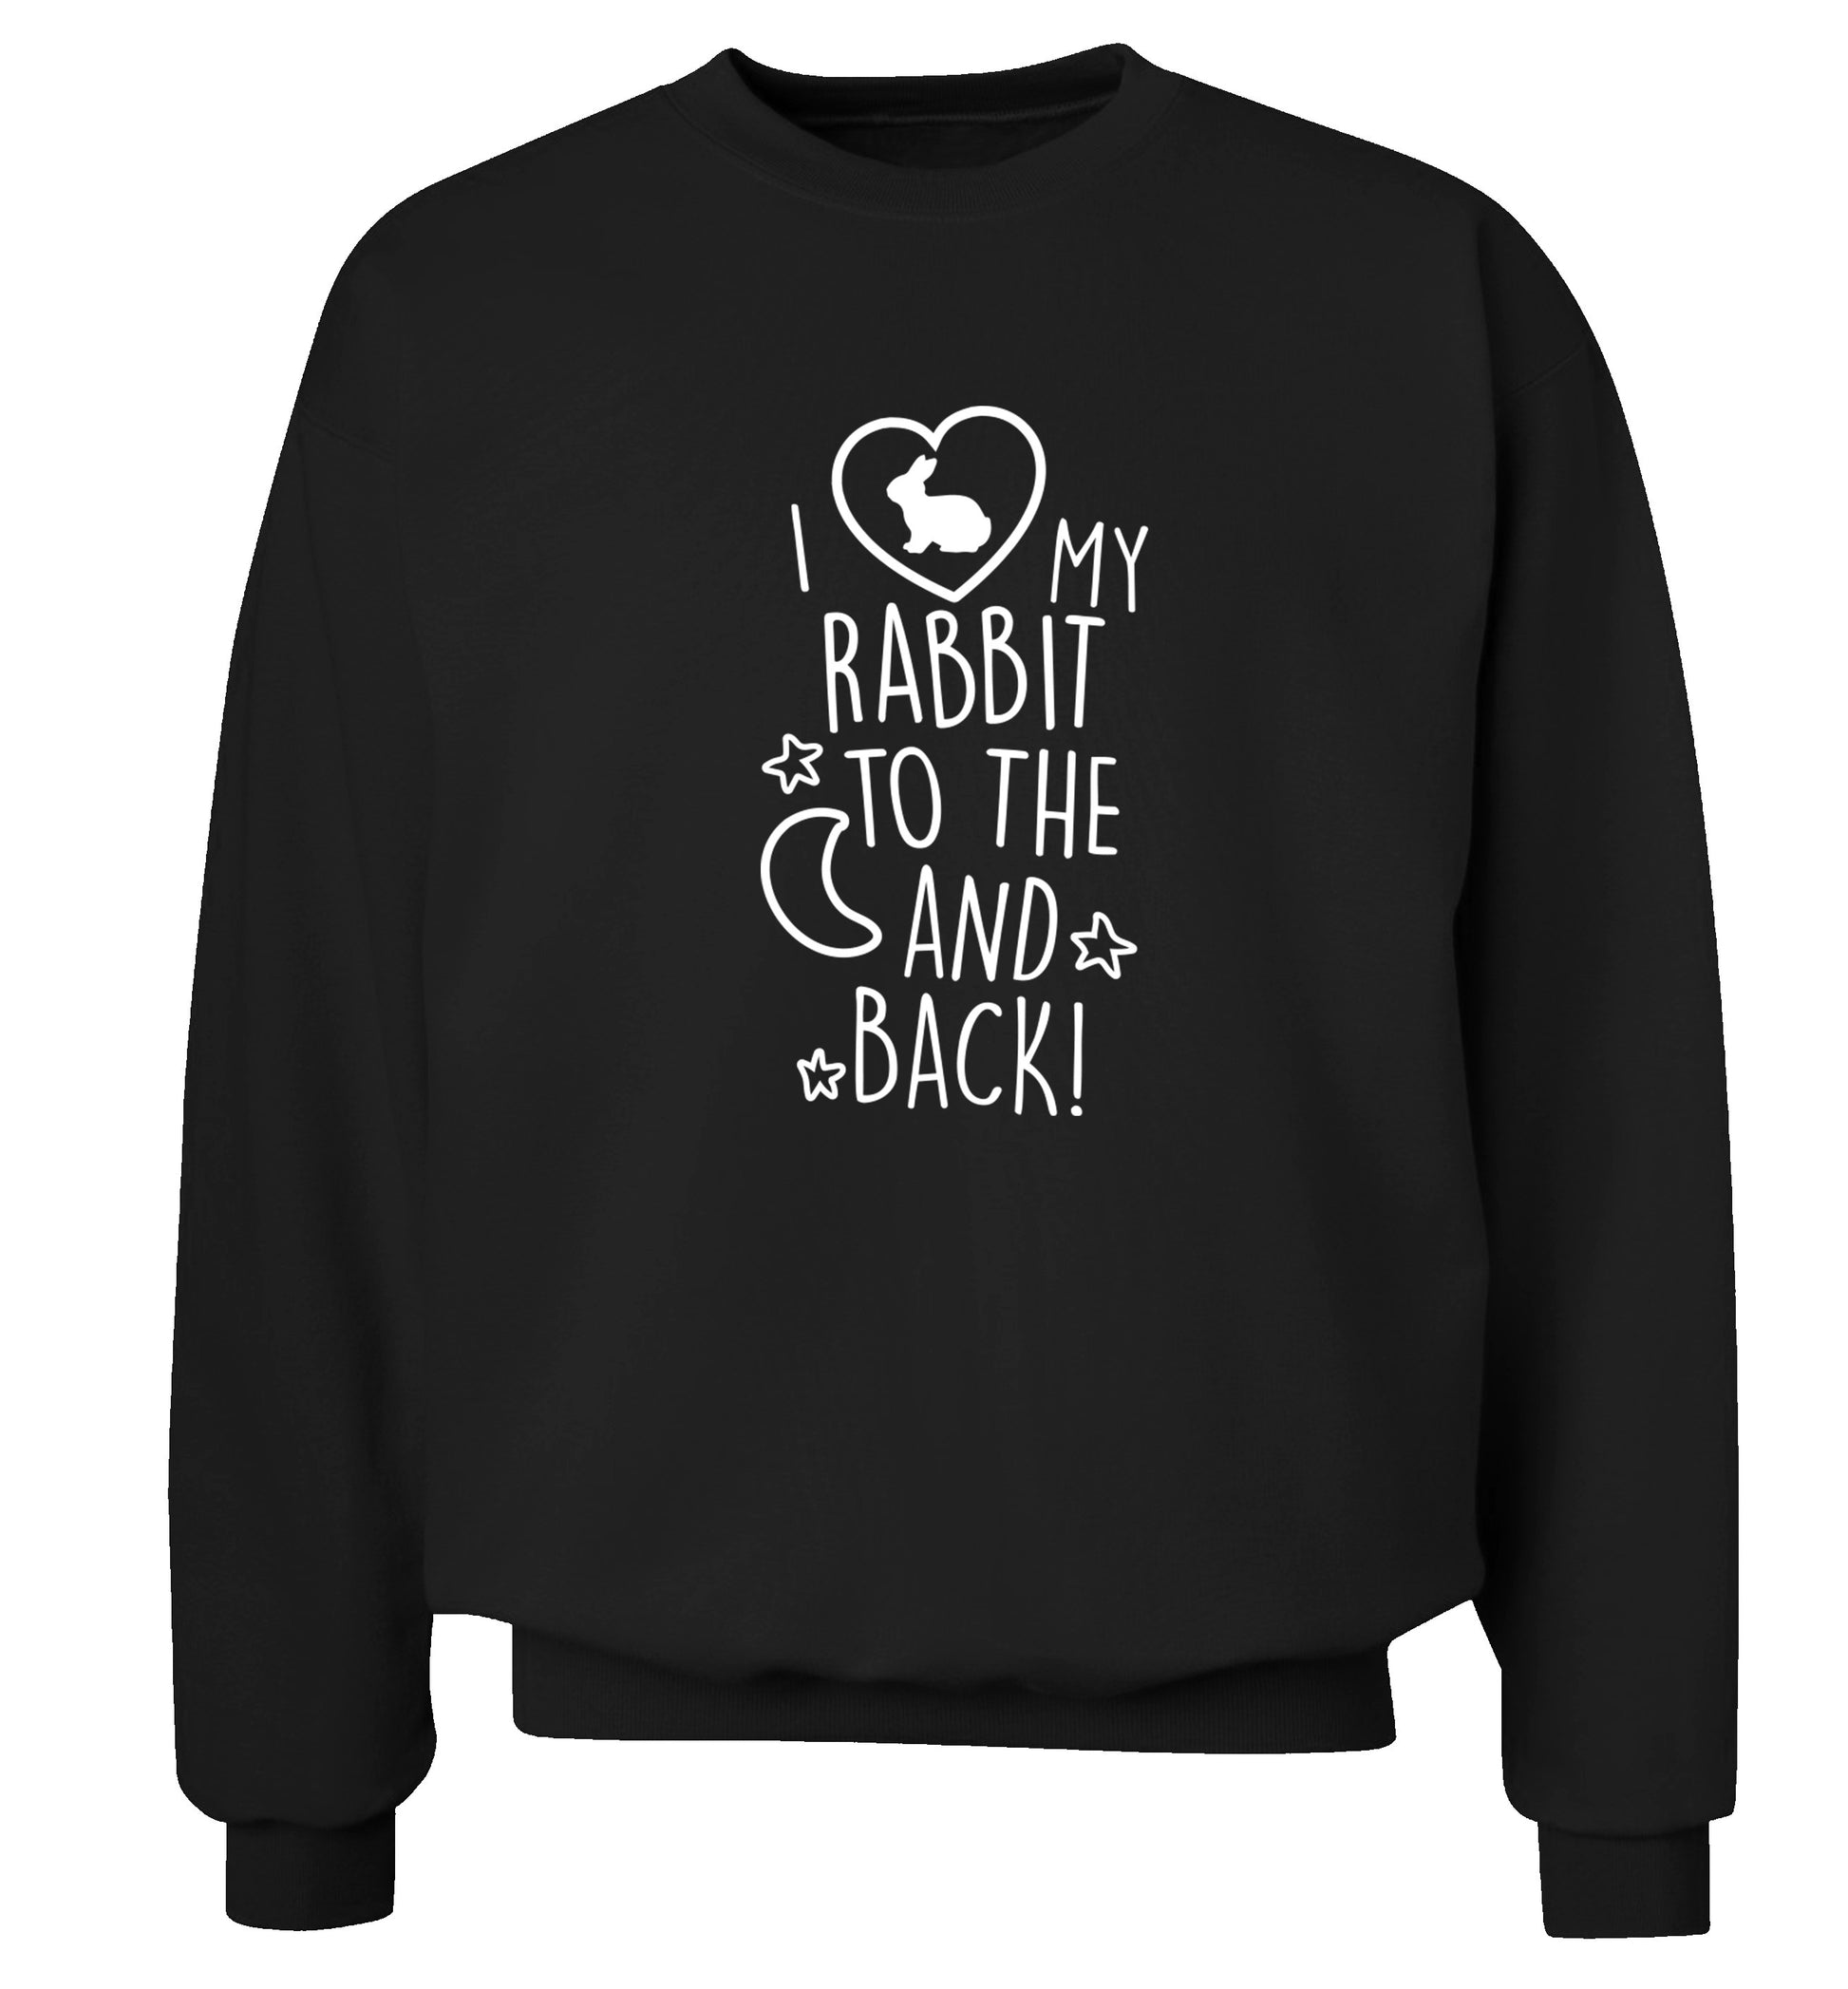 I love my rabbit to the moon and back Adult's unisex black  sweater 2XL